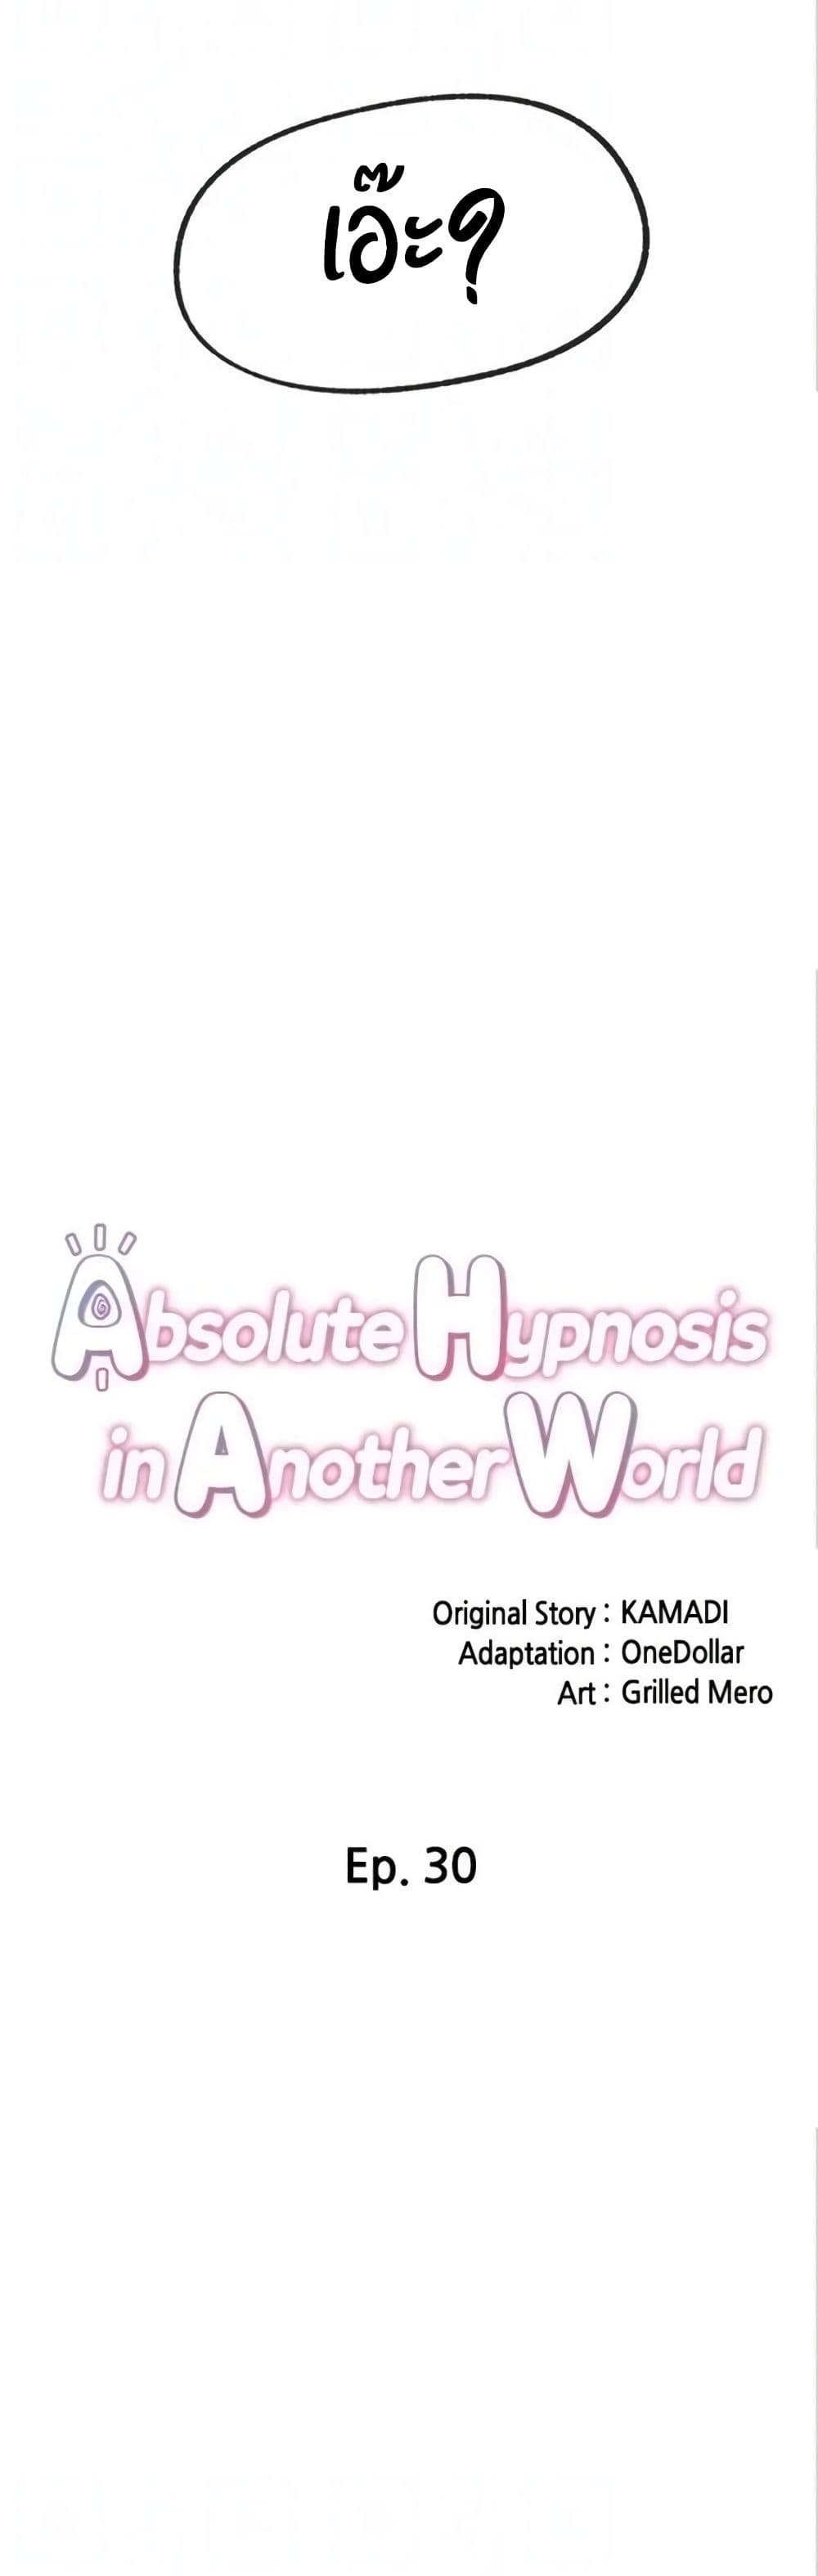 Absolute Hypnosis in Another World07